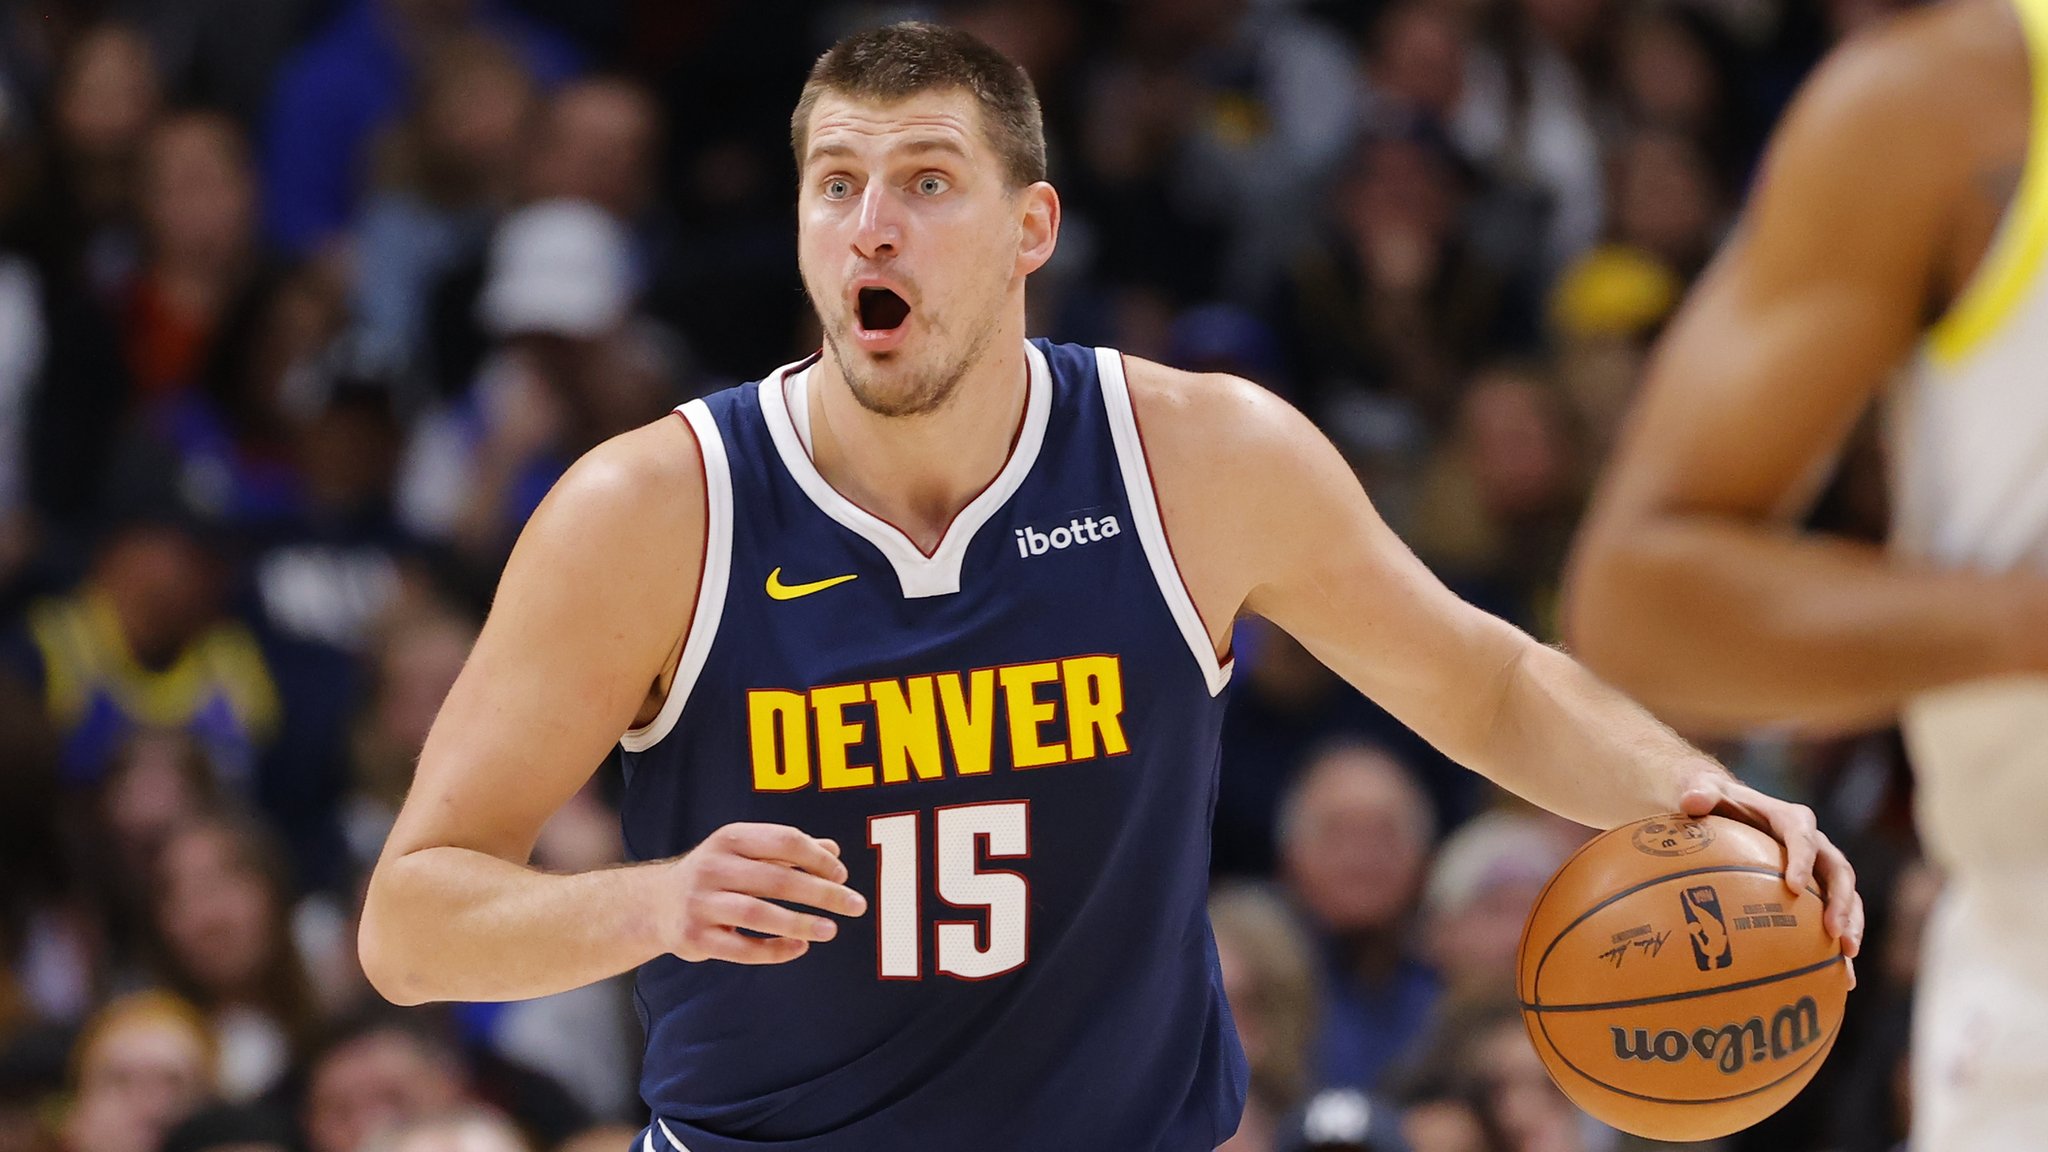 Nikola Jokic has 42 points and 12 rebounds, Nuggets beat Wizards